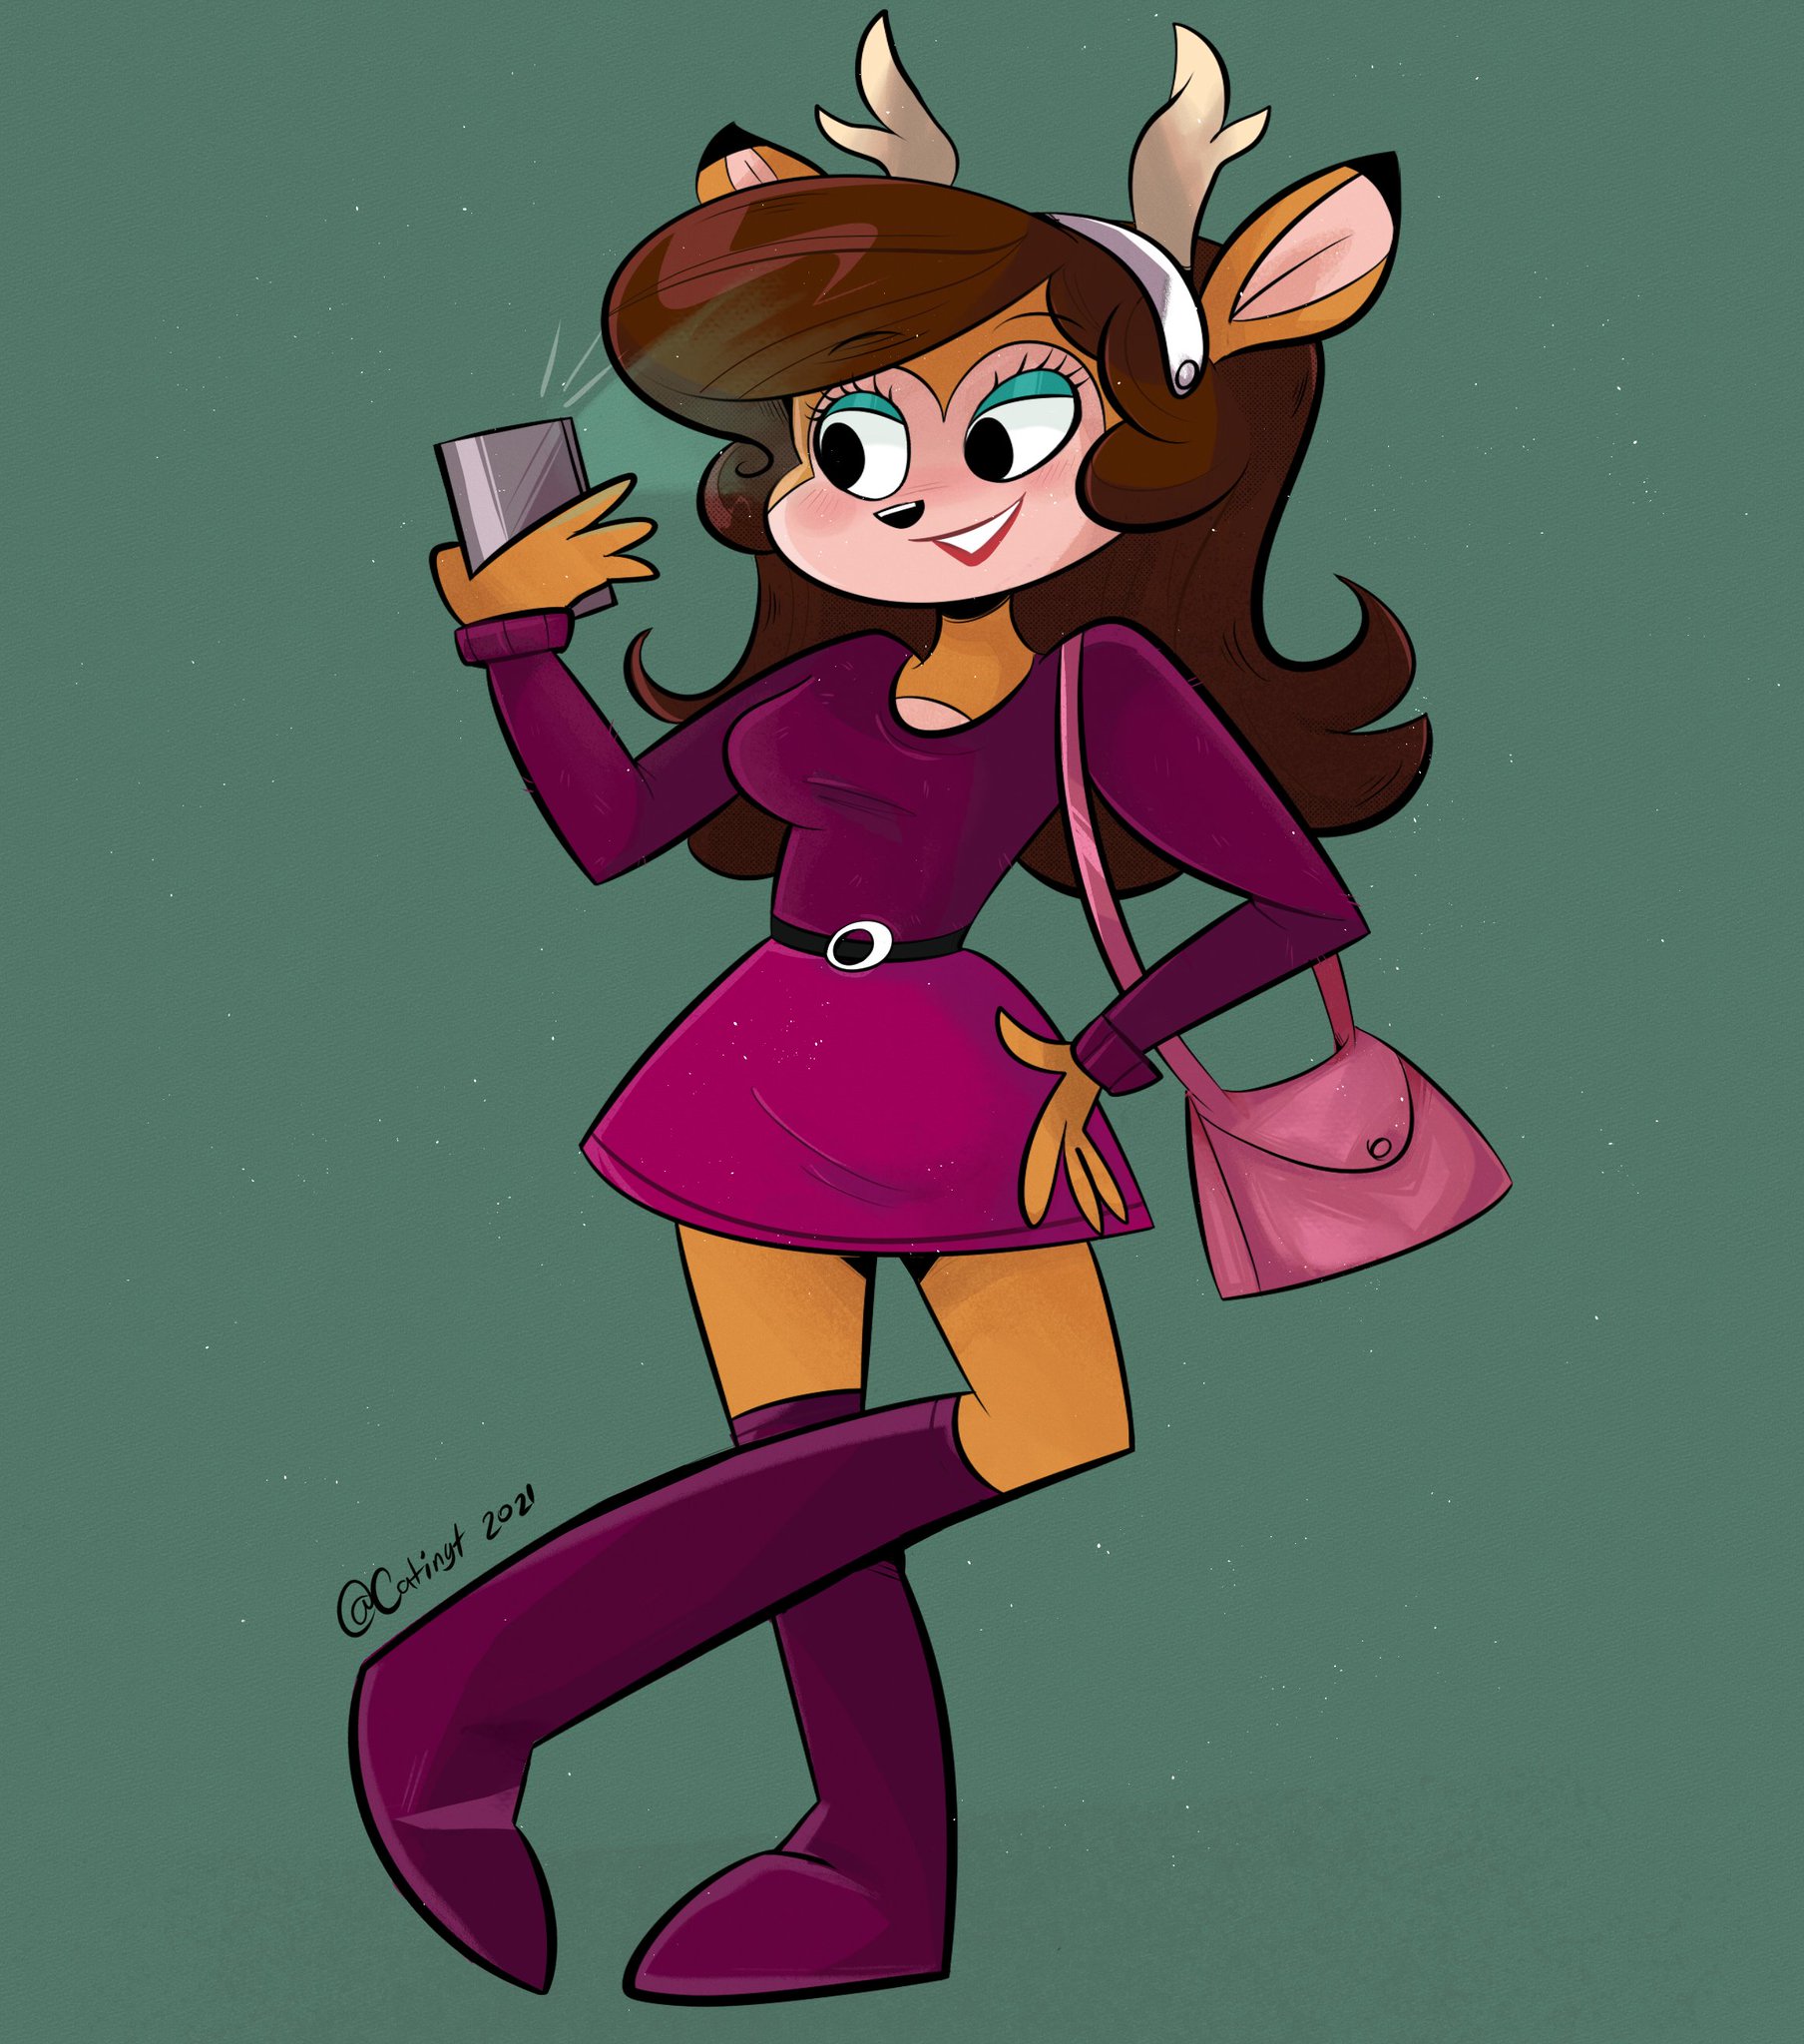 Travis Bickerstaff 🆖️ On Twitter A Wonderful Commission Of Daphne I Got From From Catinyt~♡ 🦌 